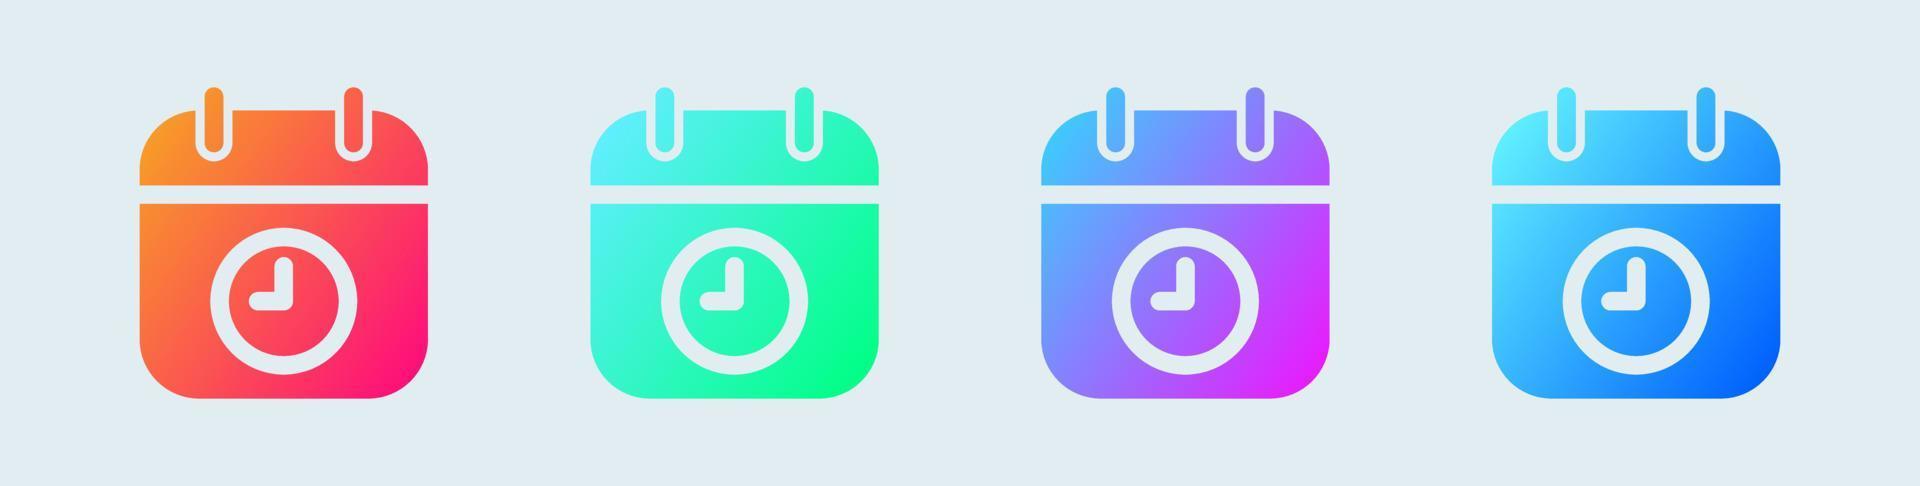 Event solid icon in gradient colors. Calender signs vector illustration.